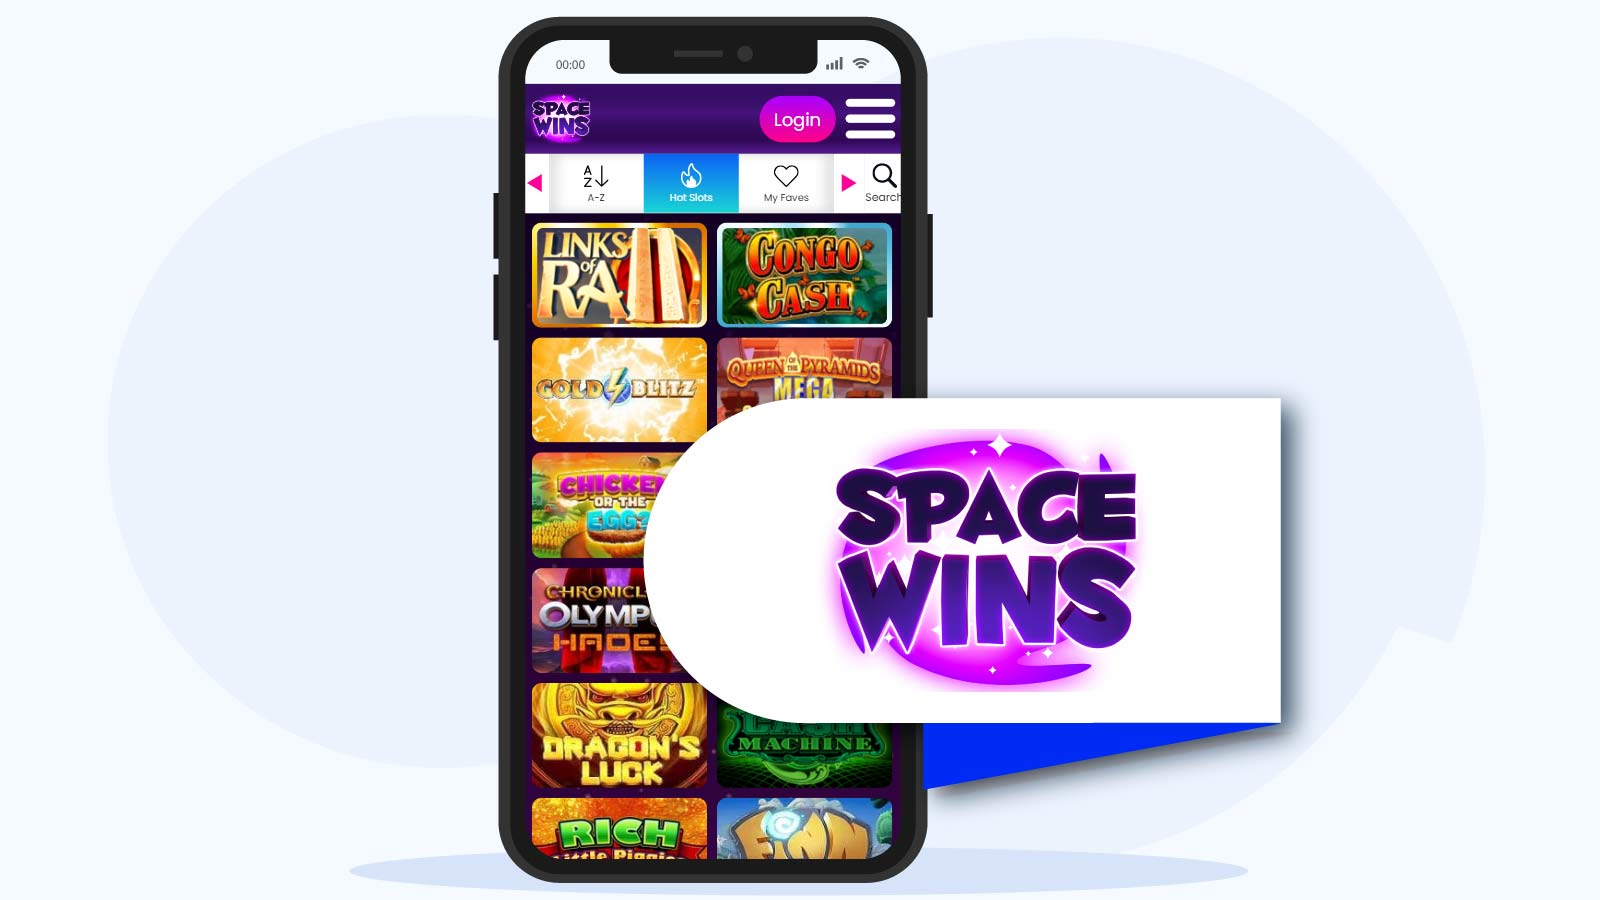 5 Free Spins Mobile Verification at Space Wins Casino